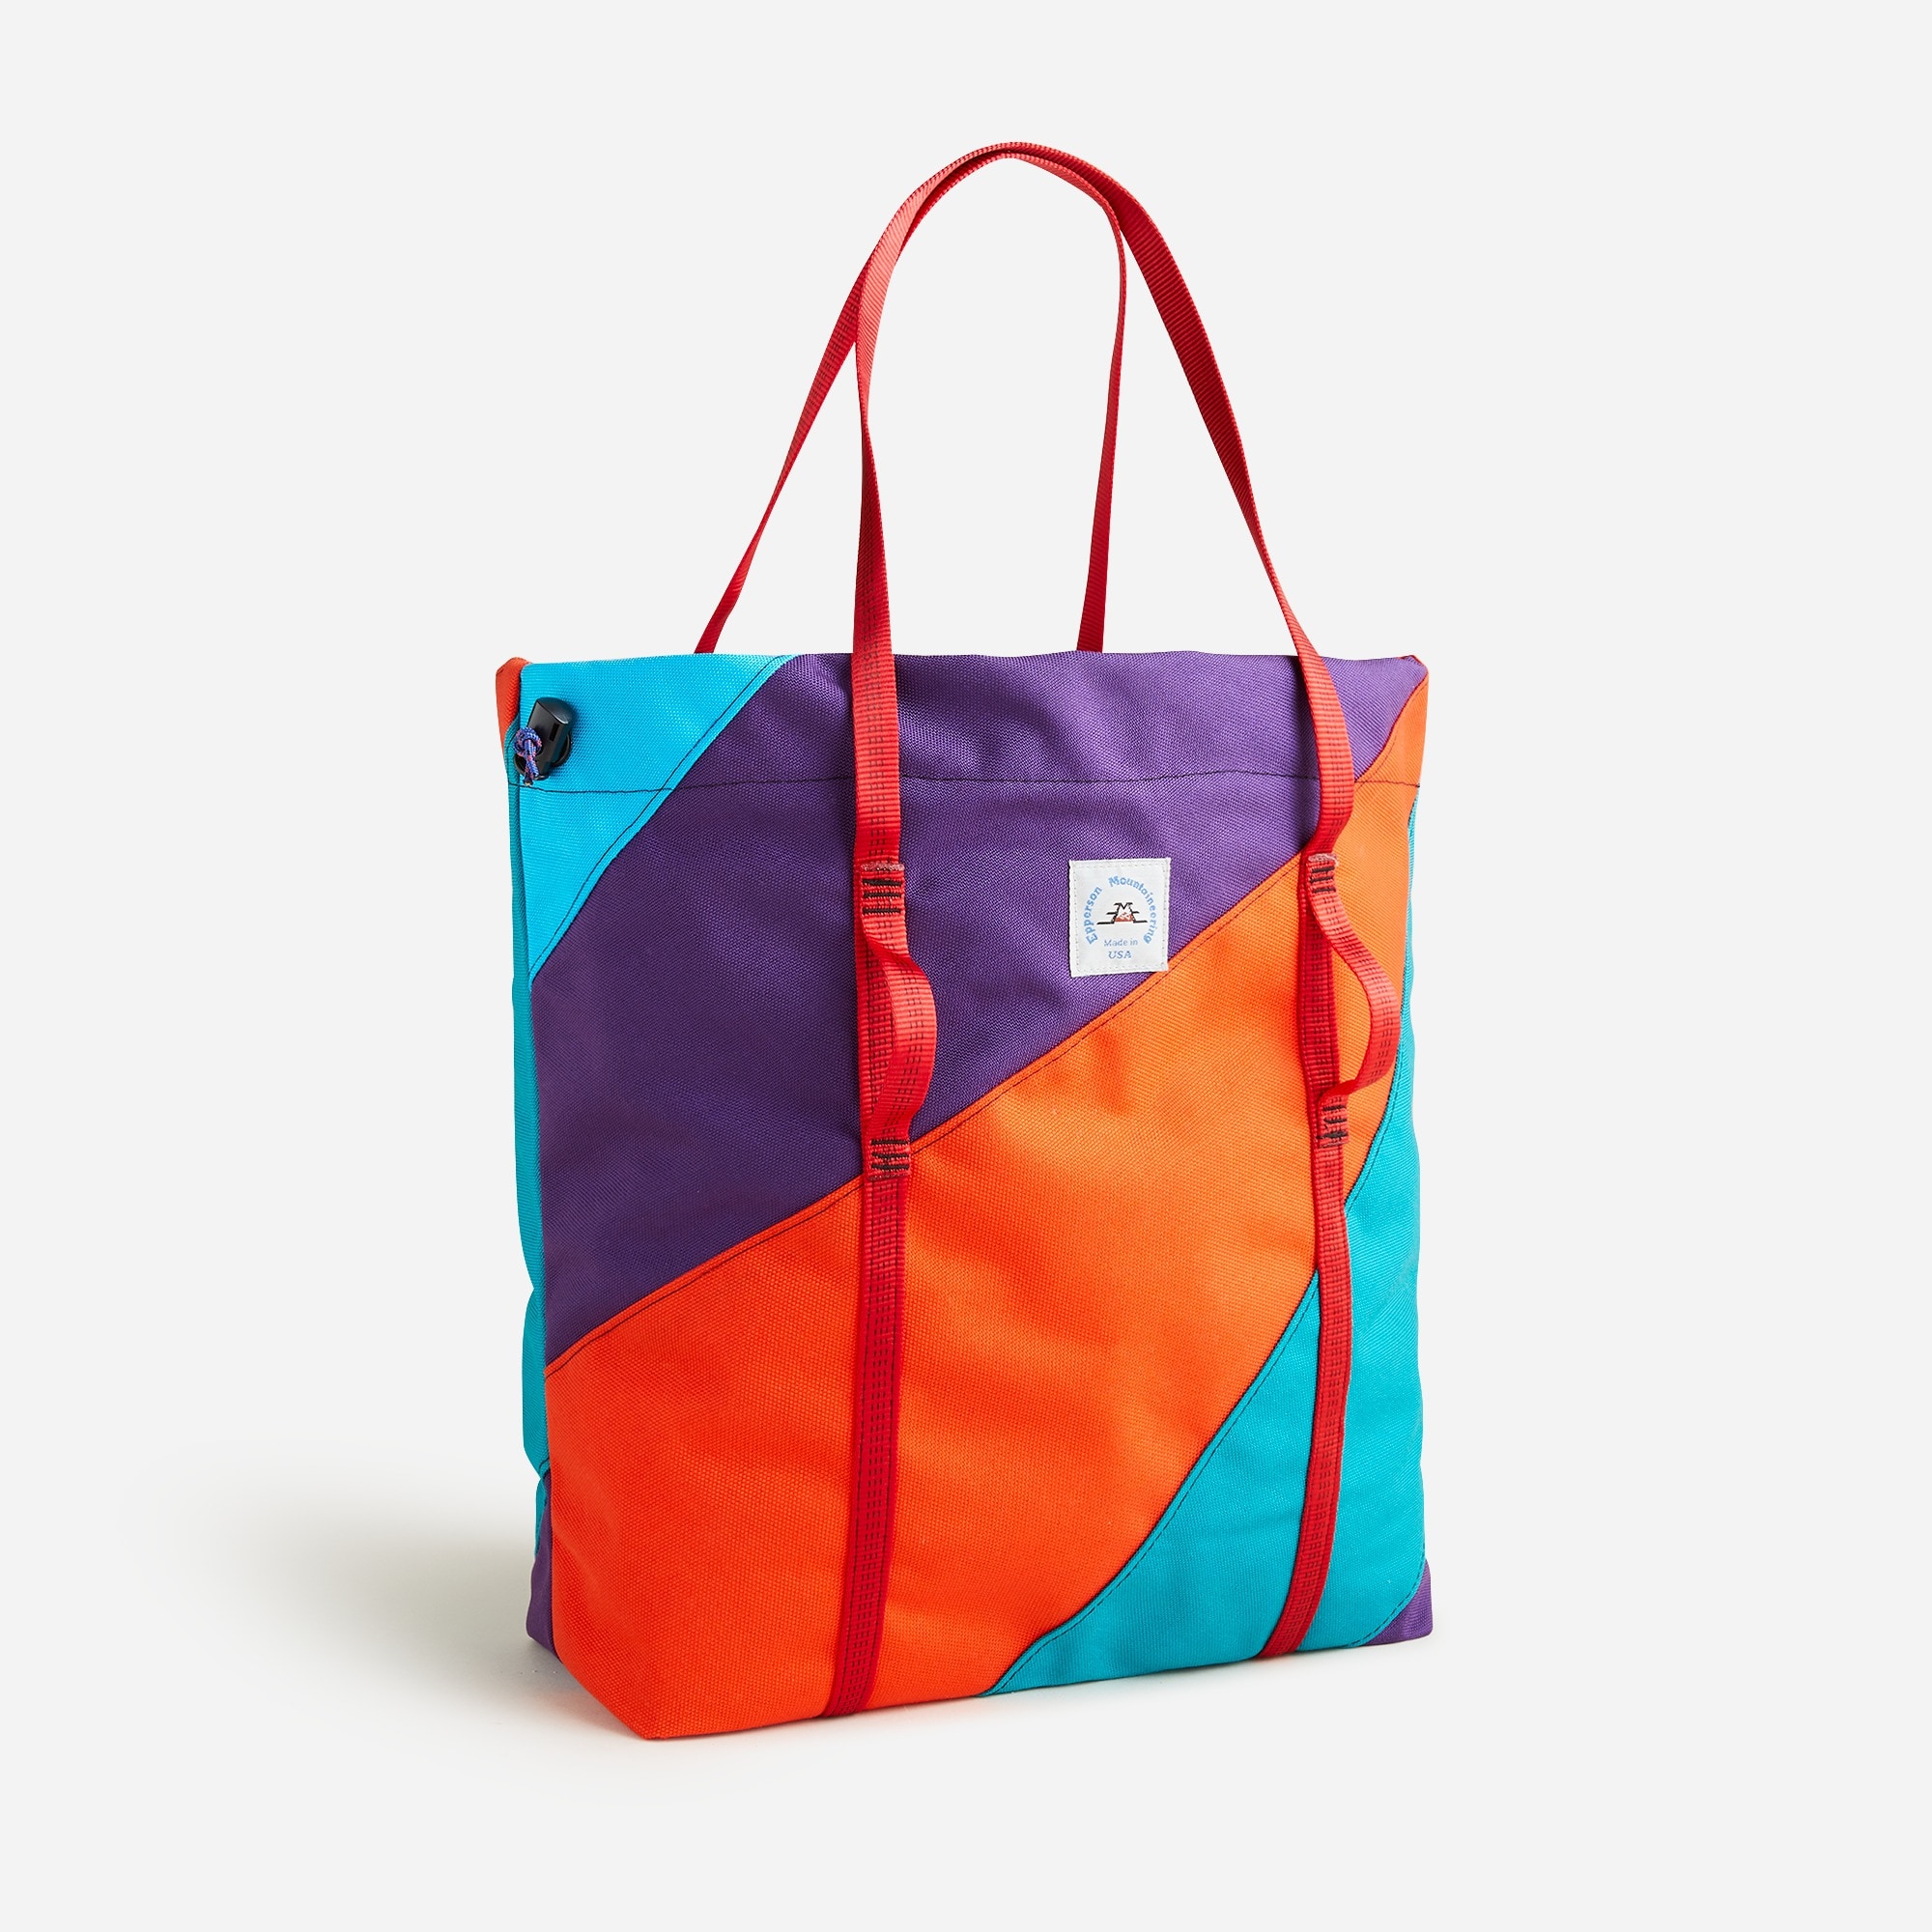 Jcrew Epperson Mountaineering leisure tote